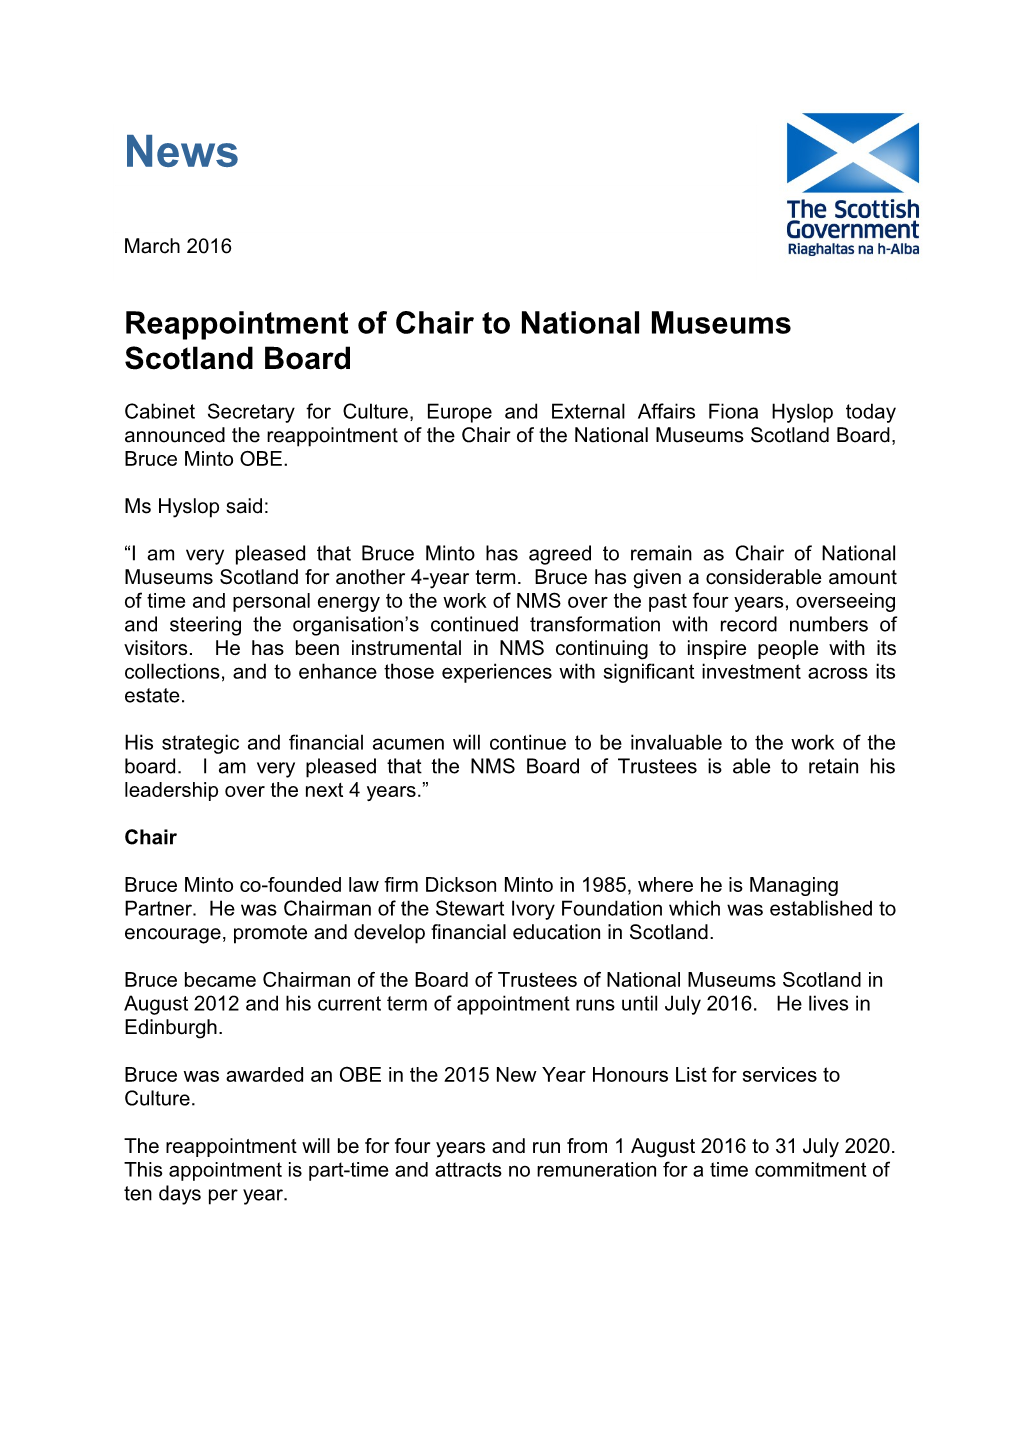 Reappointment of Chair to National Museums Scotland Board